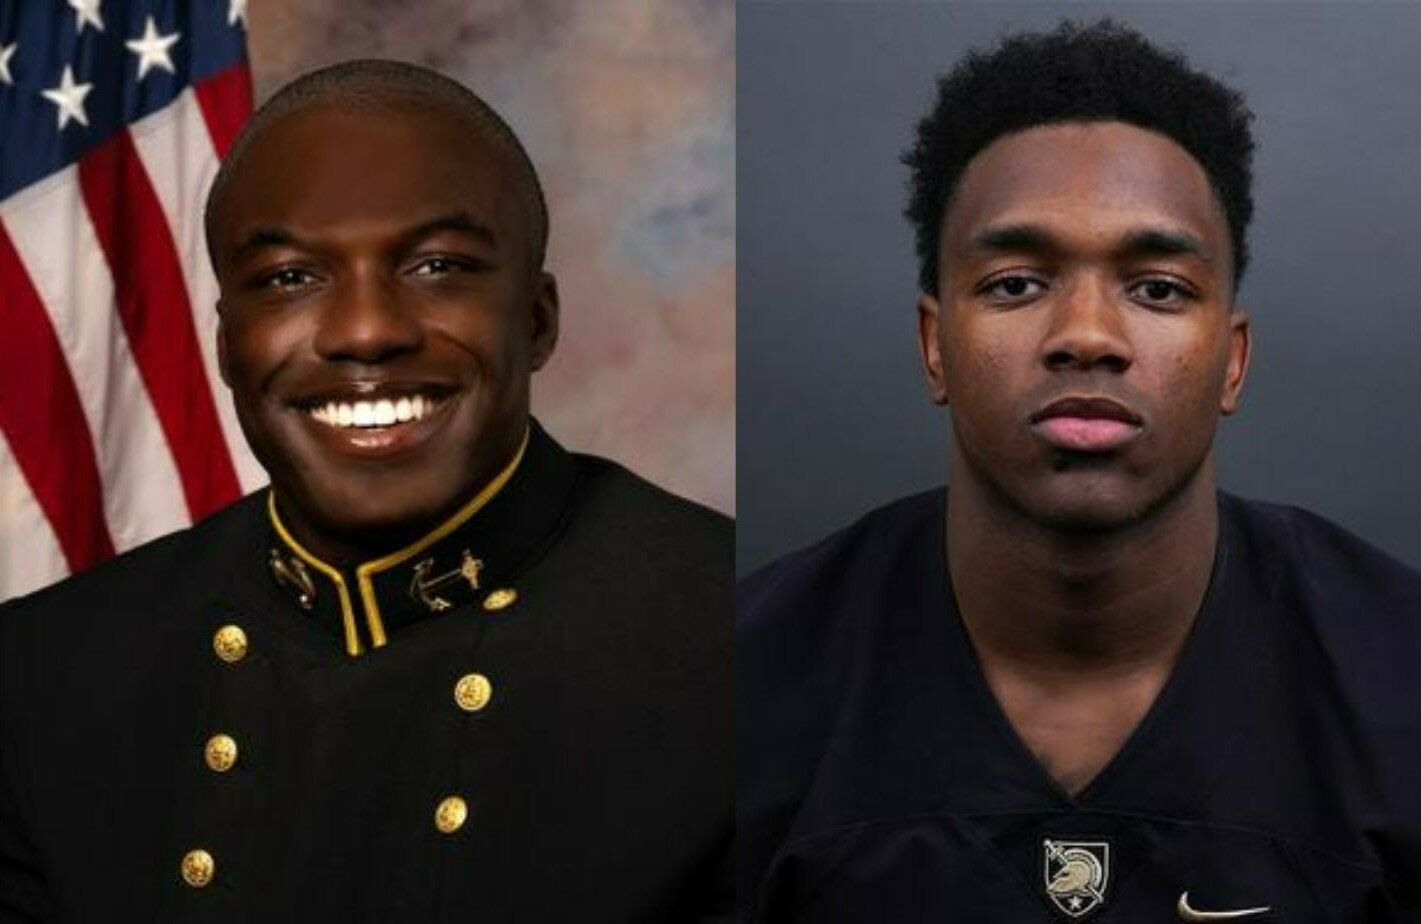 The Daphne Trojans will have a representative on either side of the Army-Navy rivalry this year. Tyler Bradley is set for his freshman season at the Naval Academy and Hamilton Baker is gearing up for his senior year at the Army Academy.